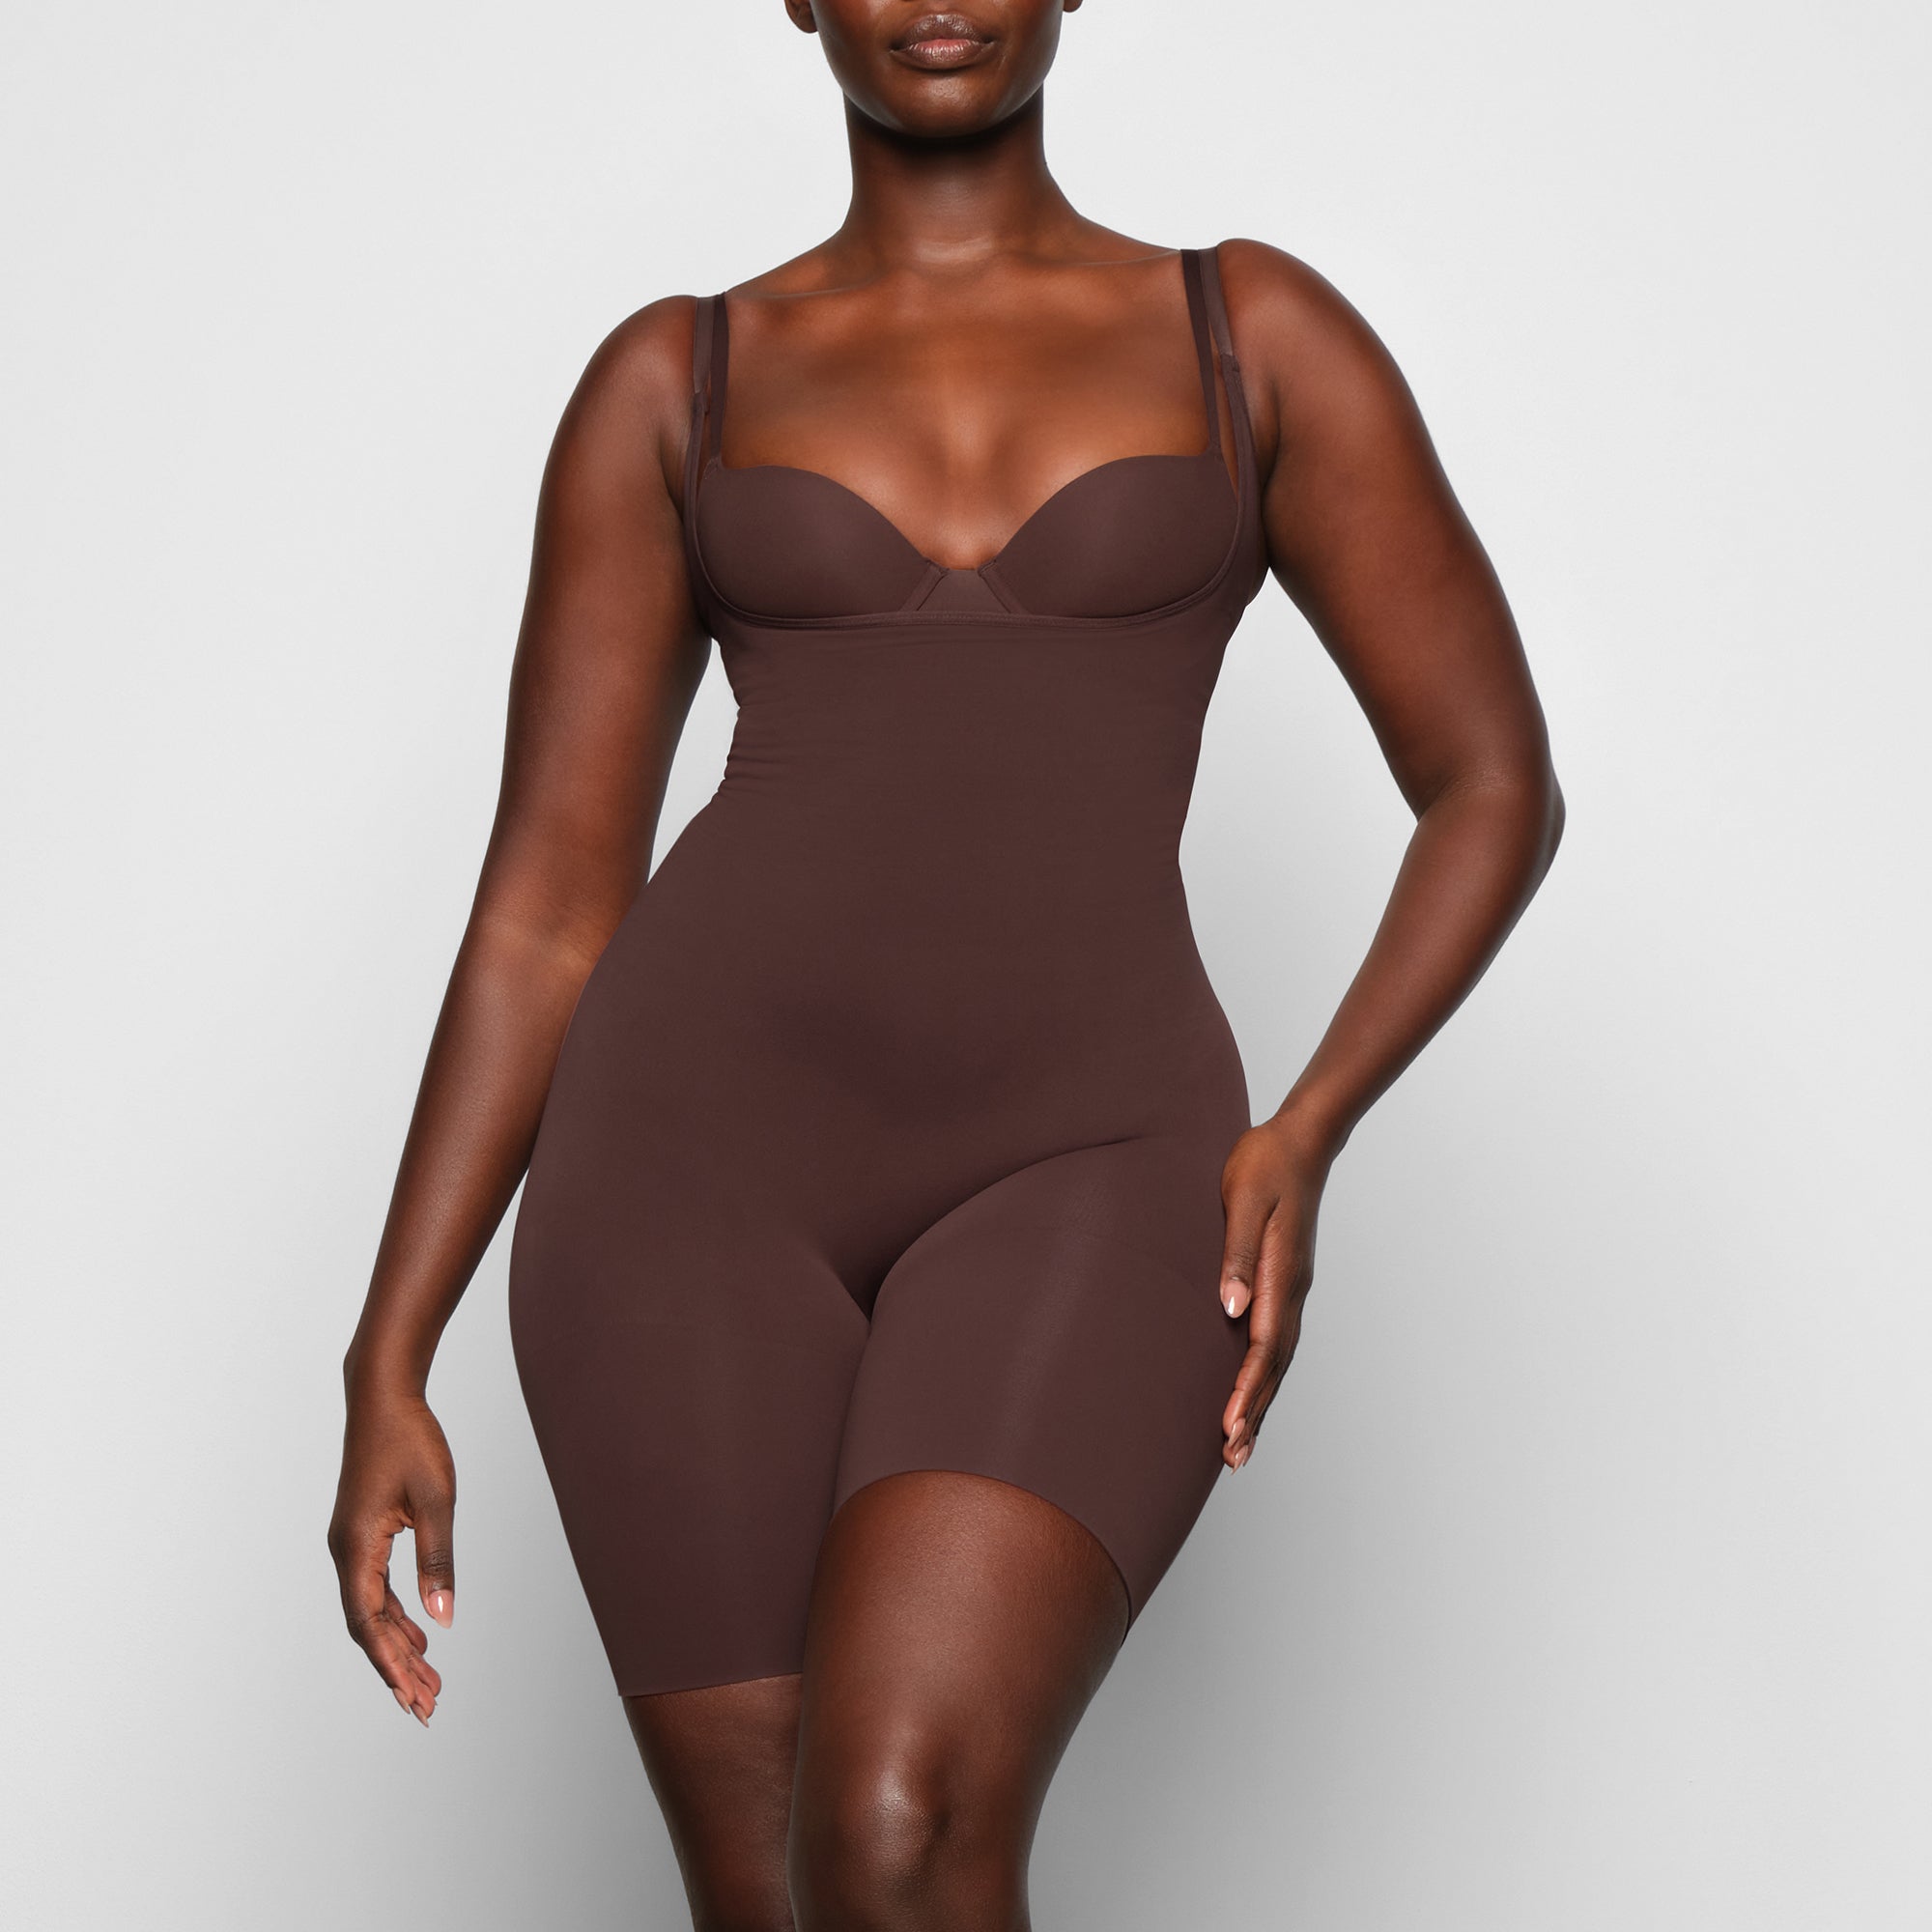 Skims Open Bust Catsuit (bodysuit) in Natural